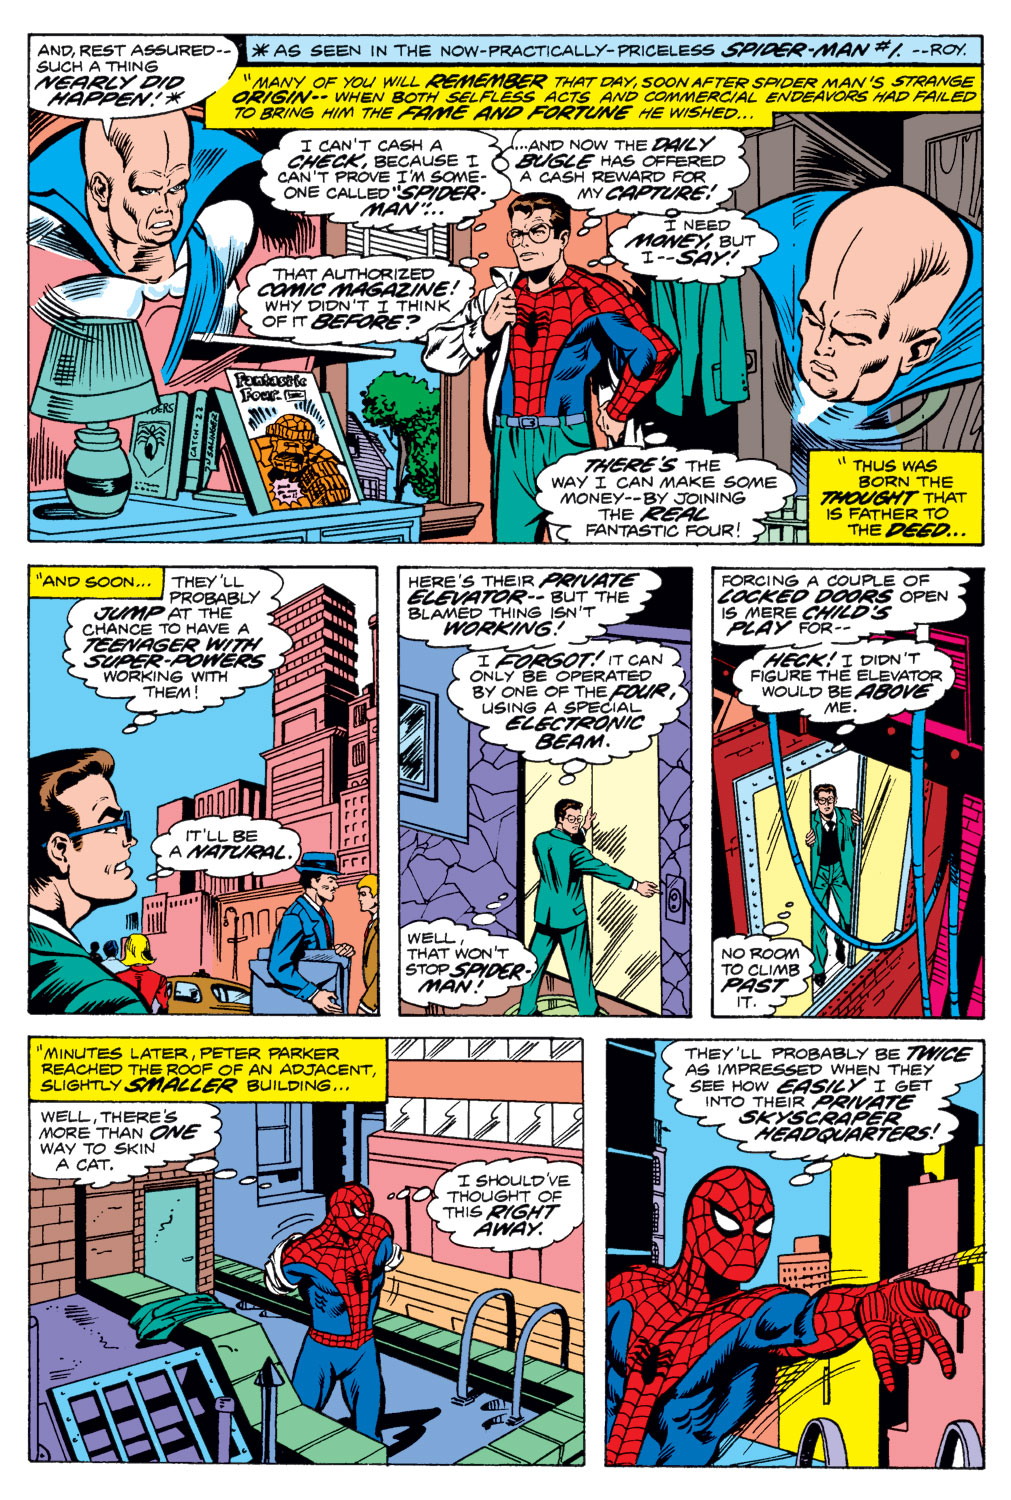 What If? (1977) issue 1 - Spider-Man joined the Fantastic Four - Page 6